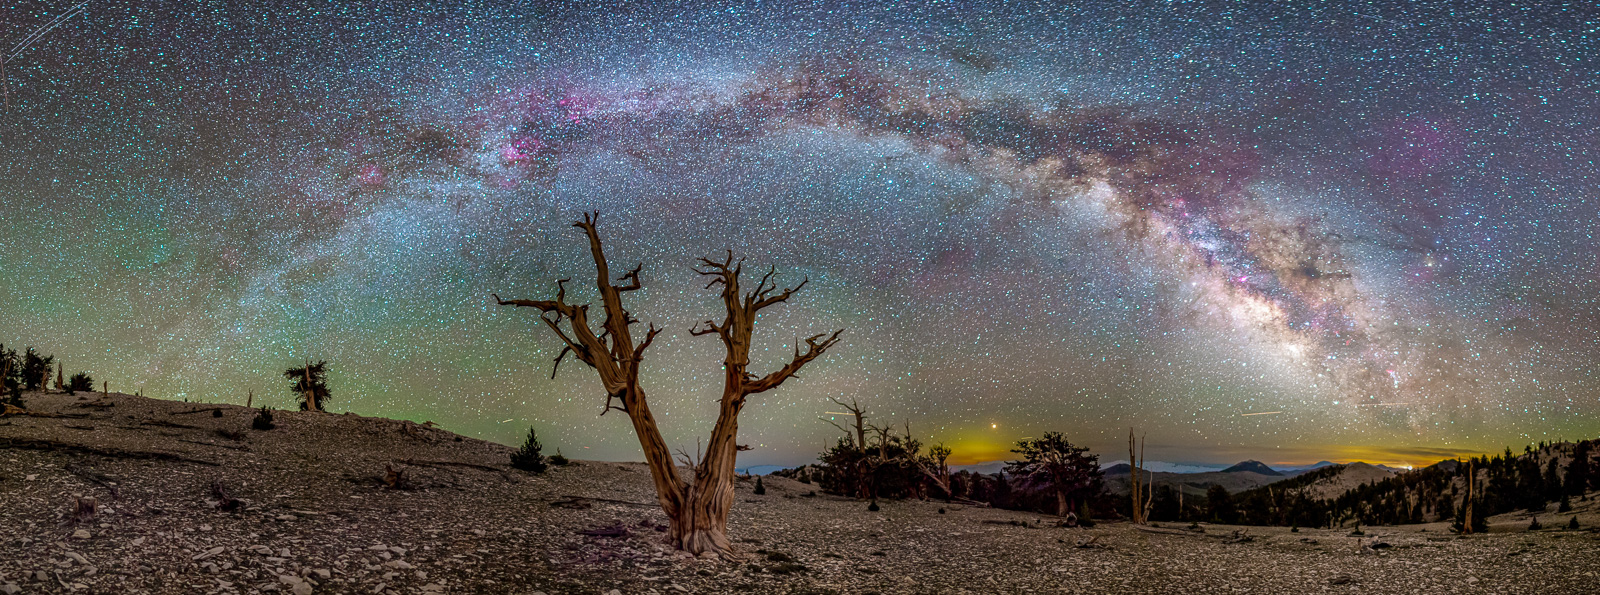 Milky Way and Ancient Bristlecone Pine